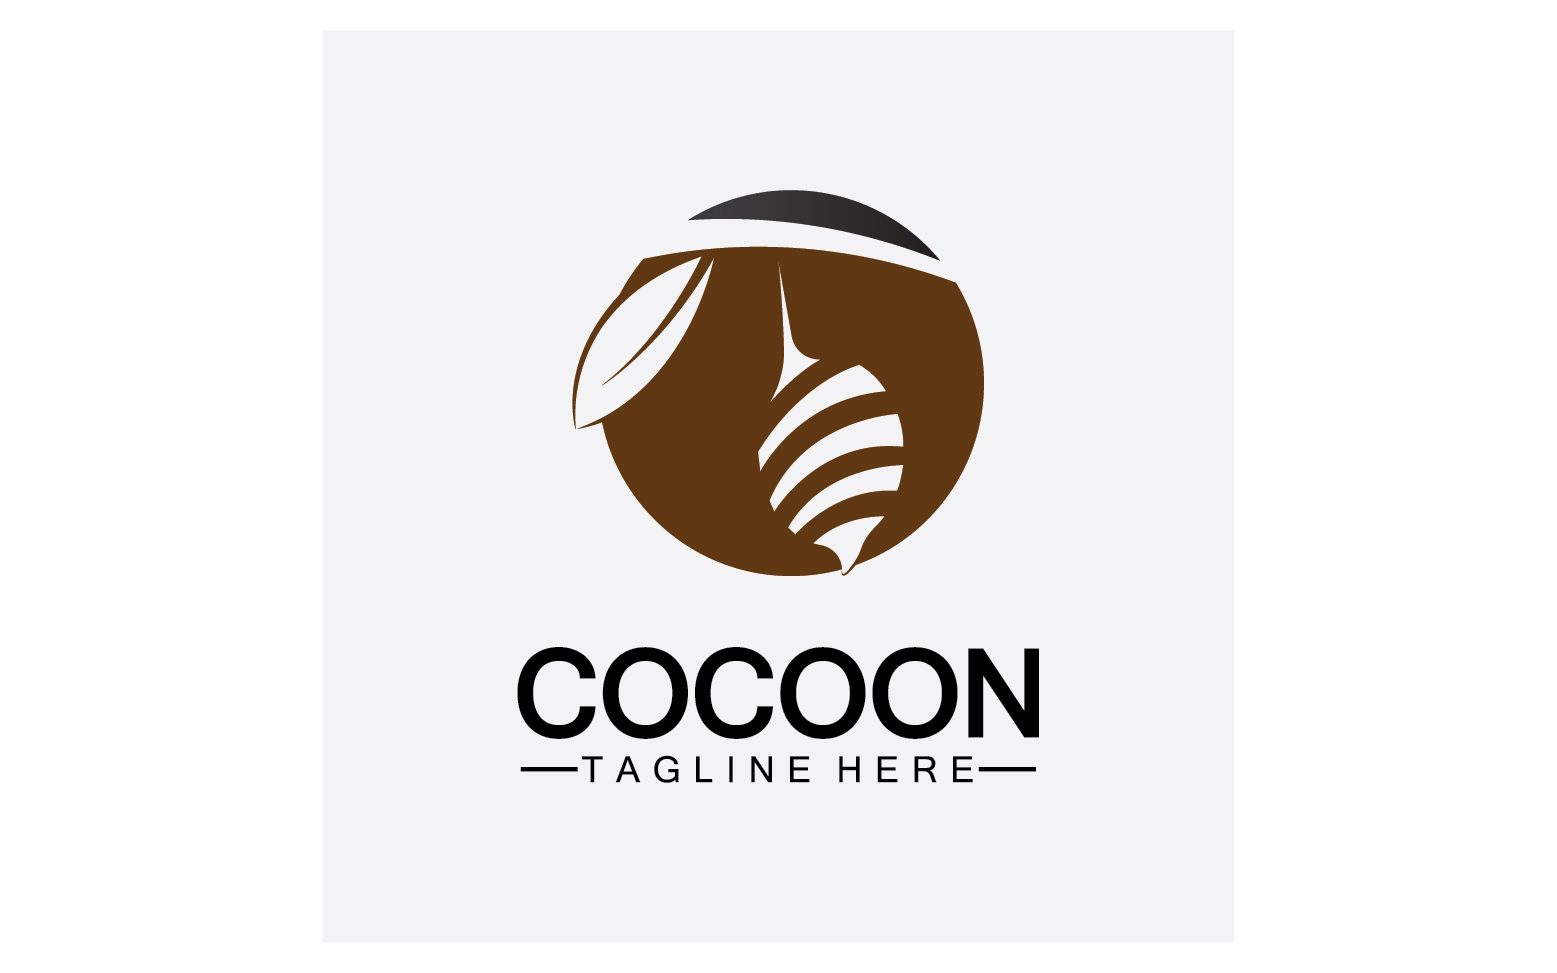 Cocoon butterfly logo icon vector v24